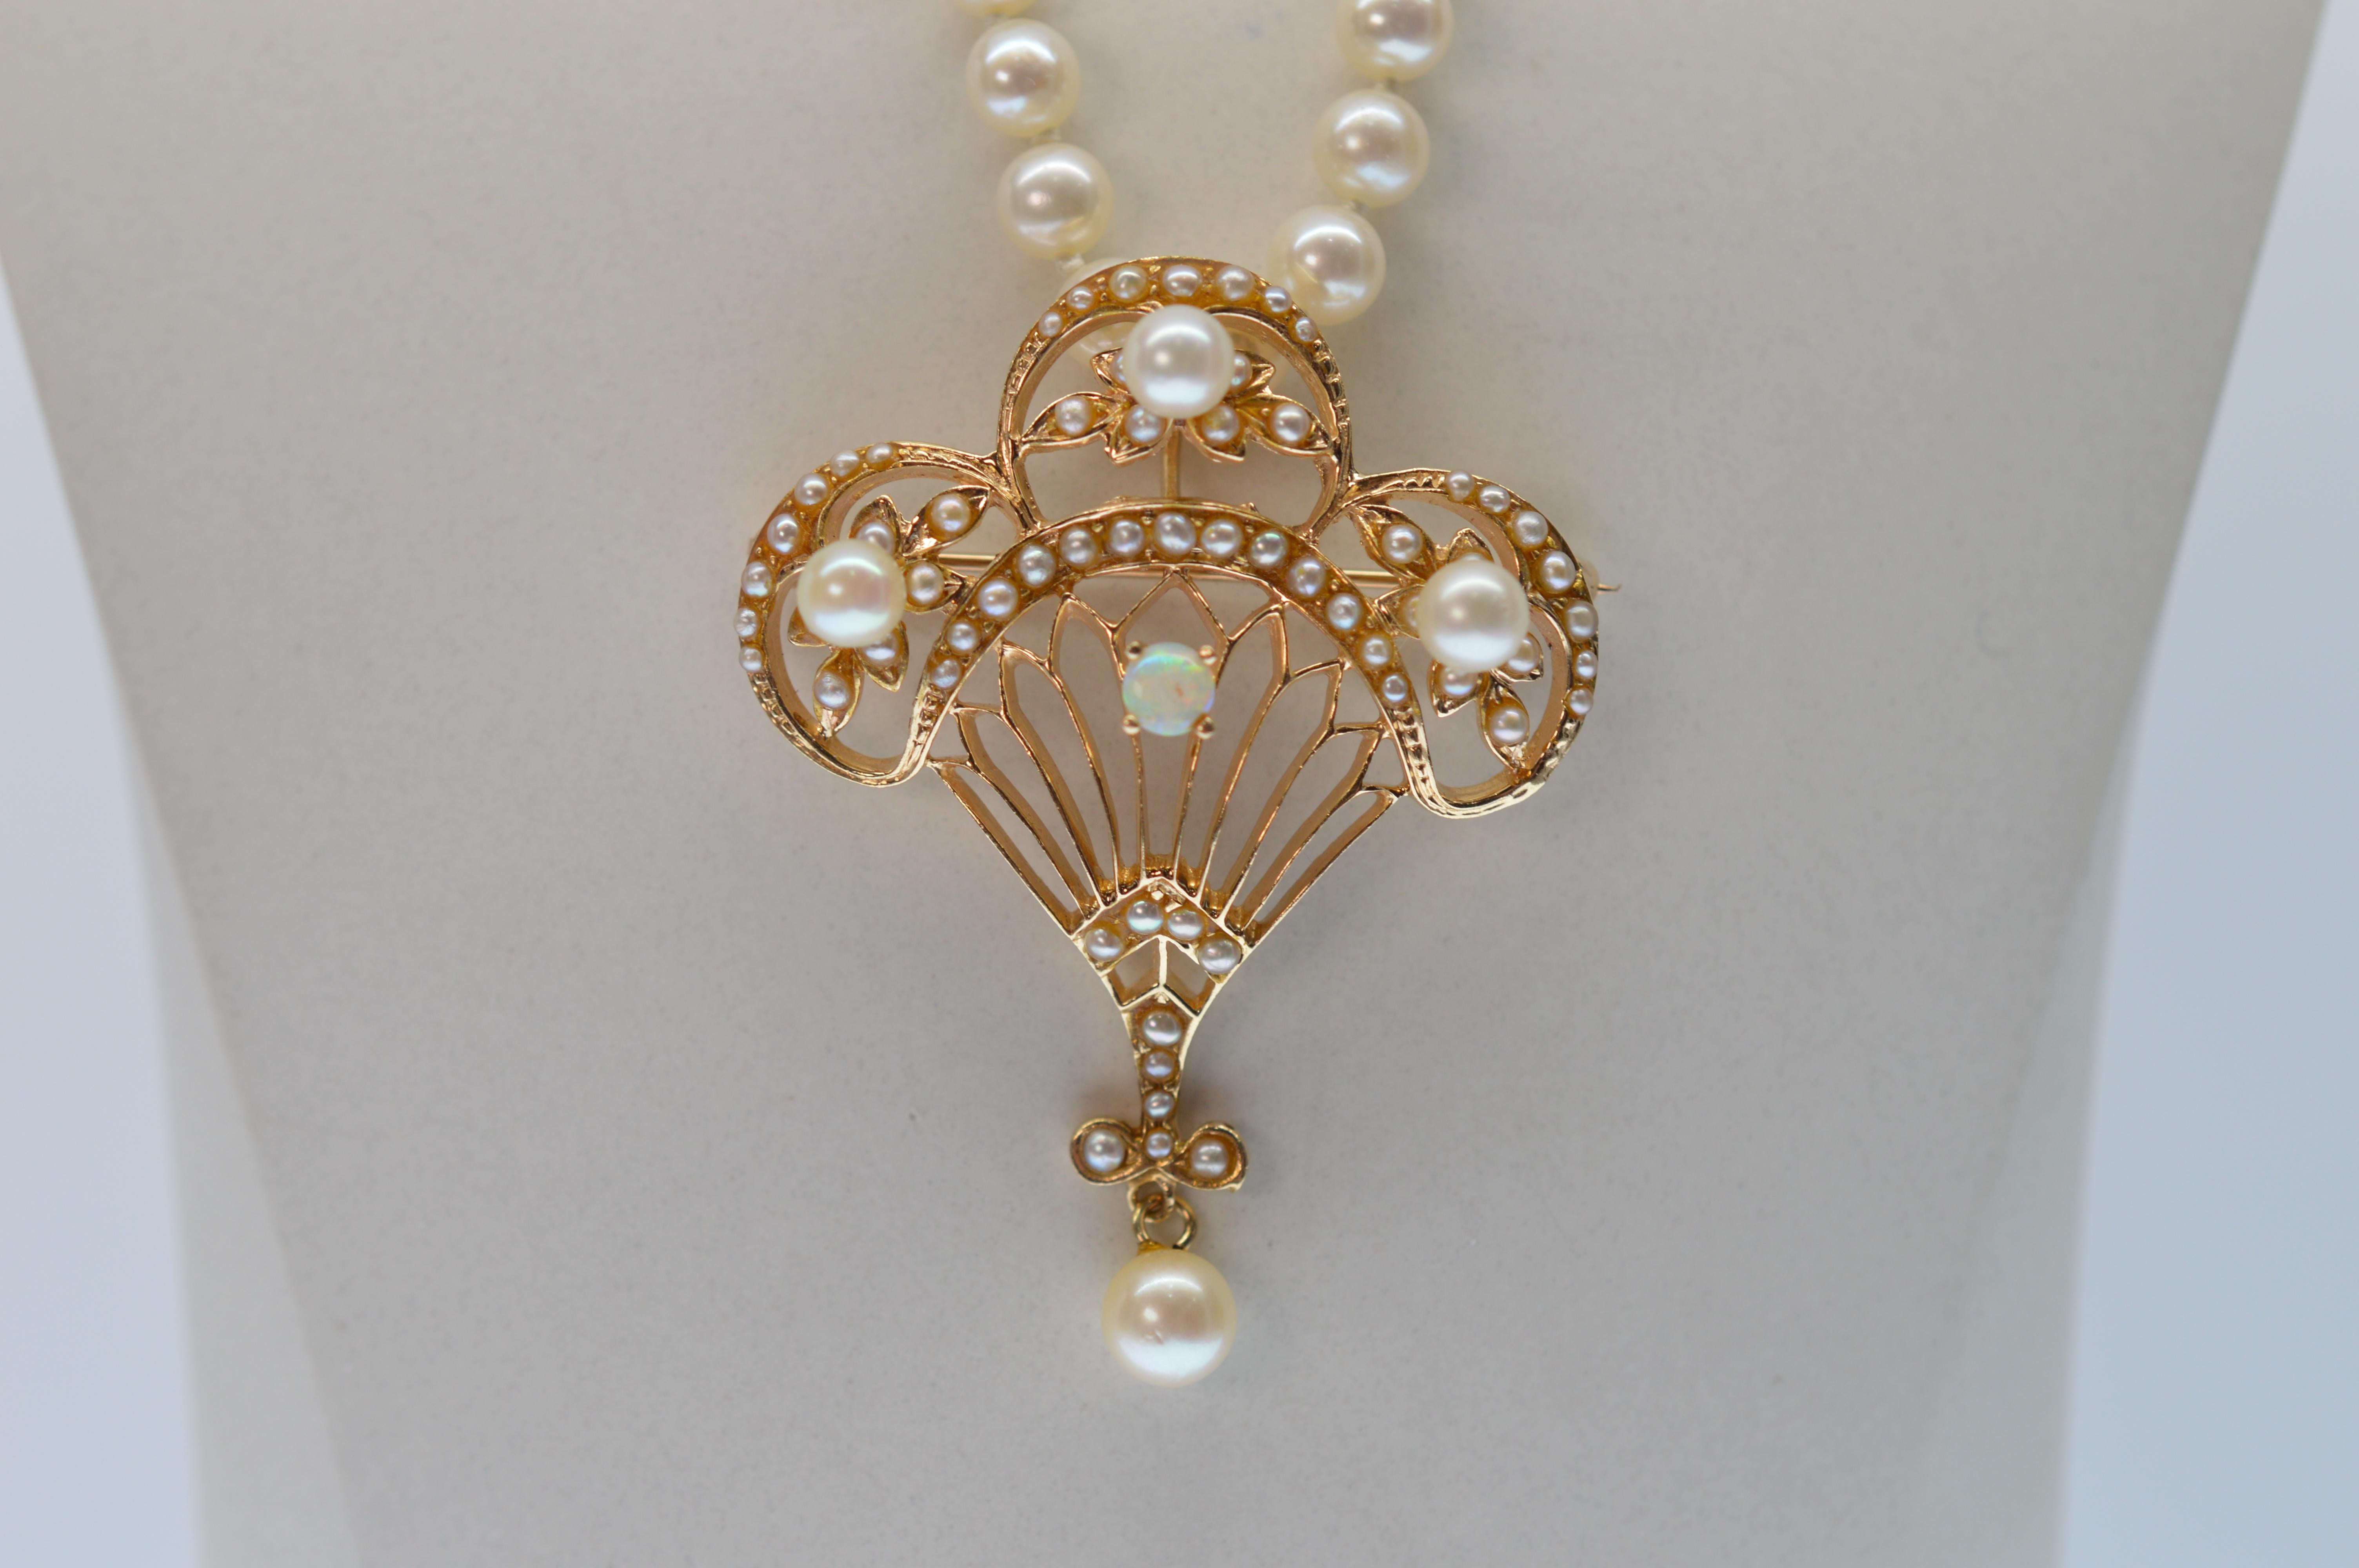 A fancy Antique Style 14k Yellow Gold Pendant / Brooch adorns this twenty four inch 5.5 x 5mm AAA Akoya Pearl Strand creating this stunning yet versatile Necklace that will surely garner compliments. The Pendant of brilliant 14k Gold is adorned with